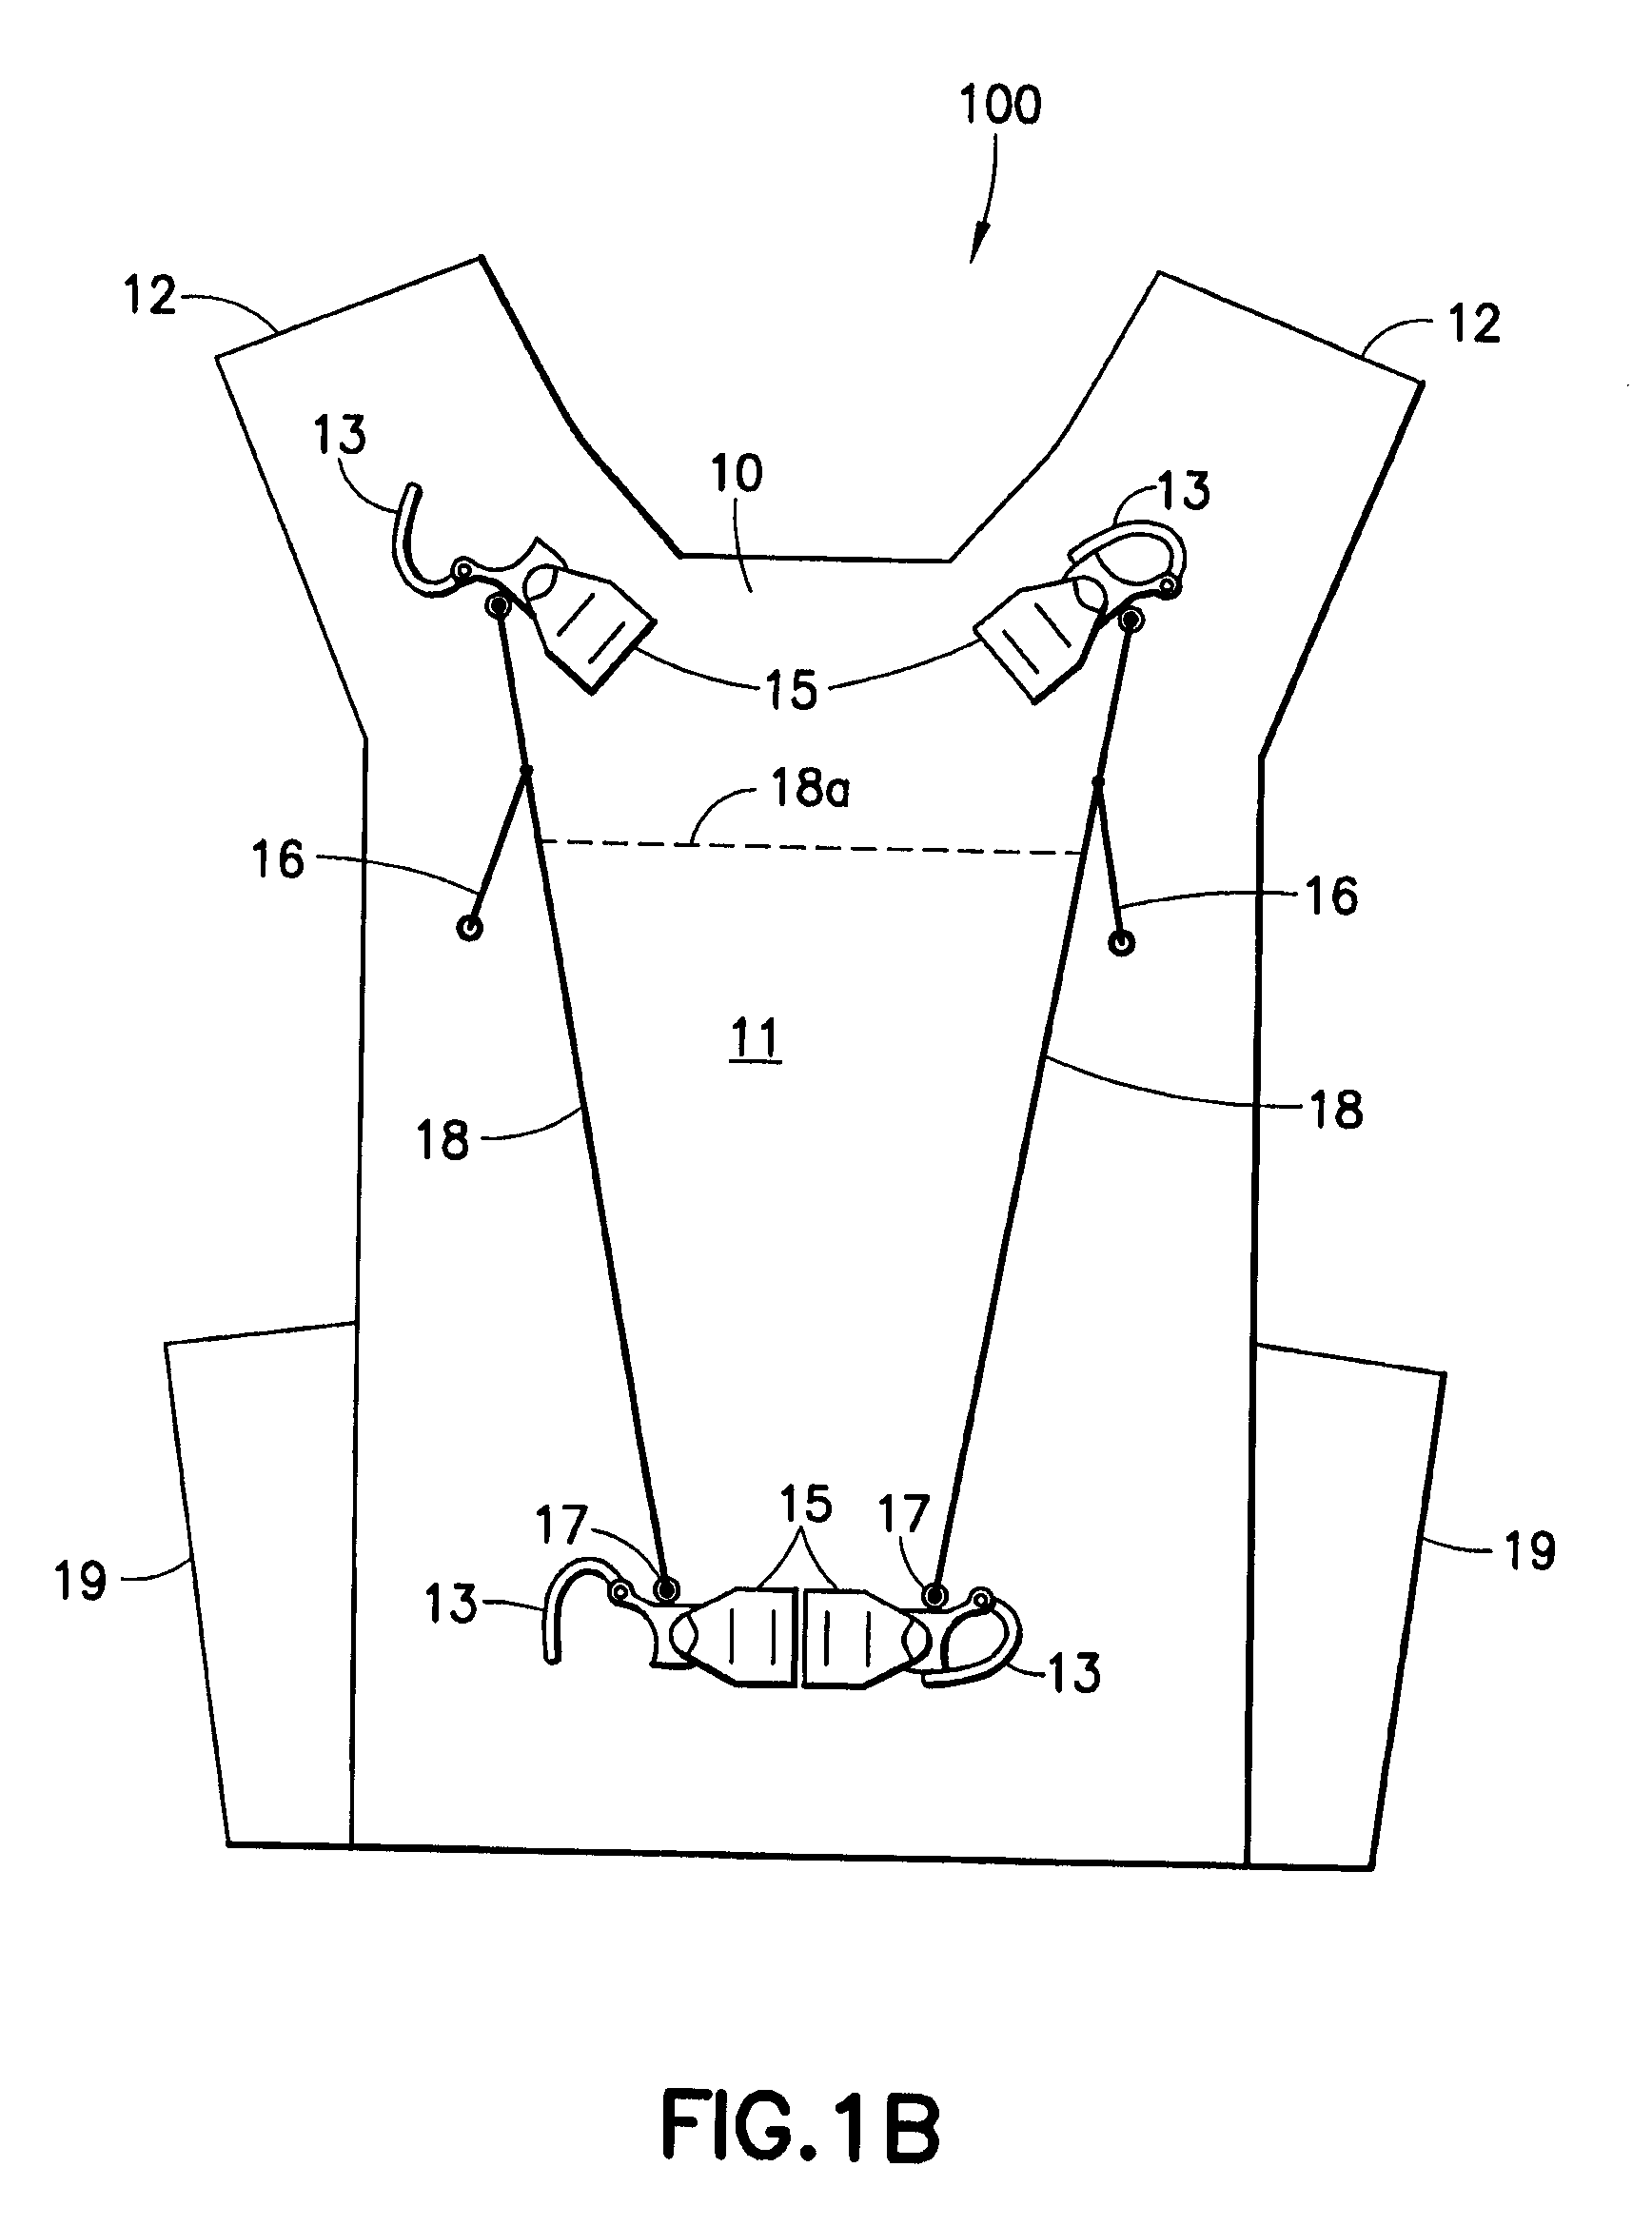 Protective garment having a quick release system